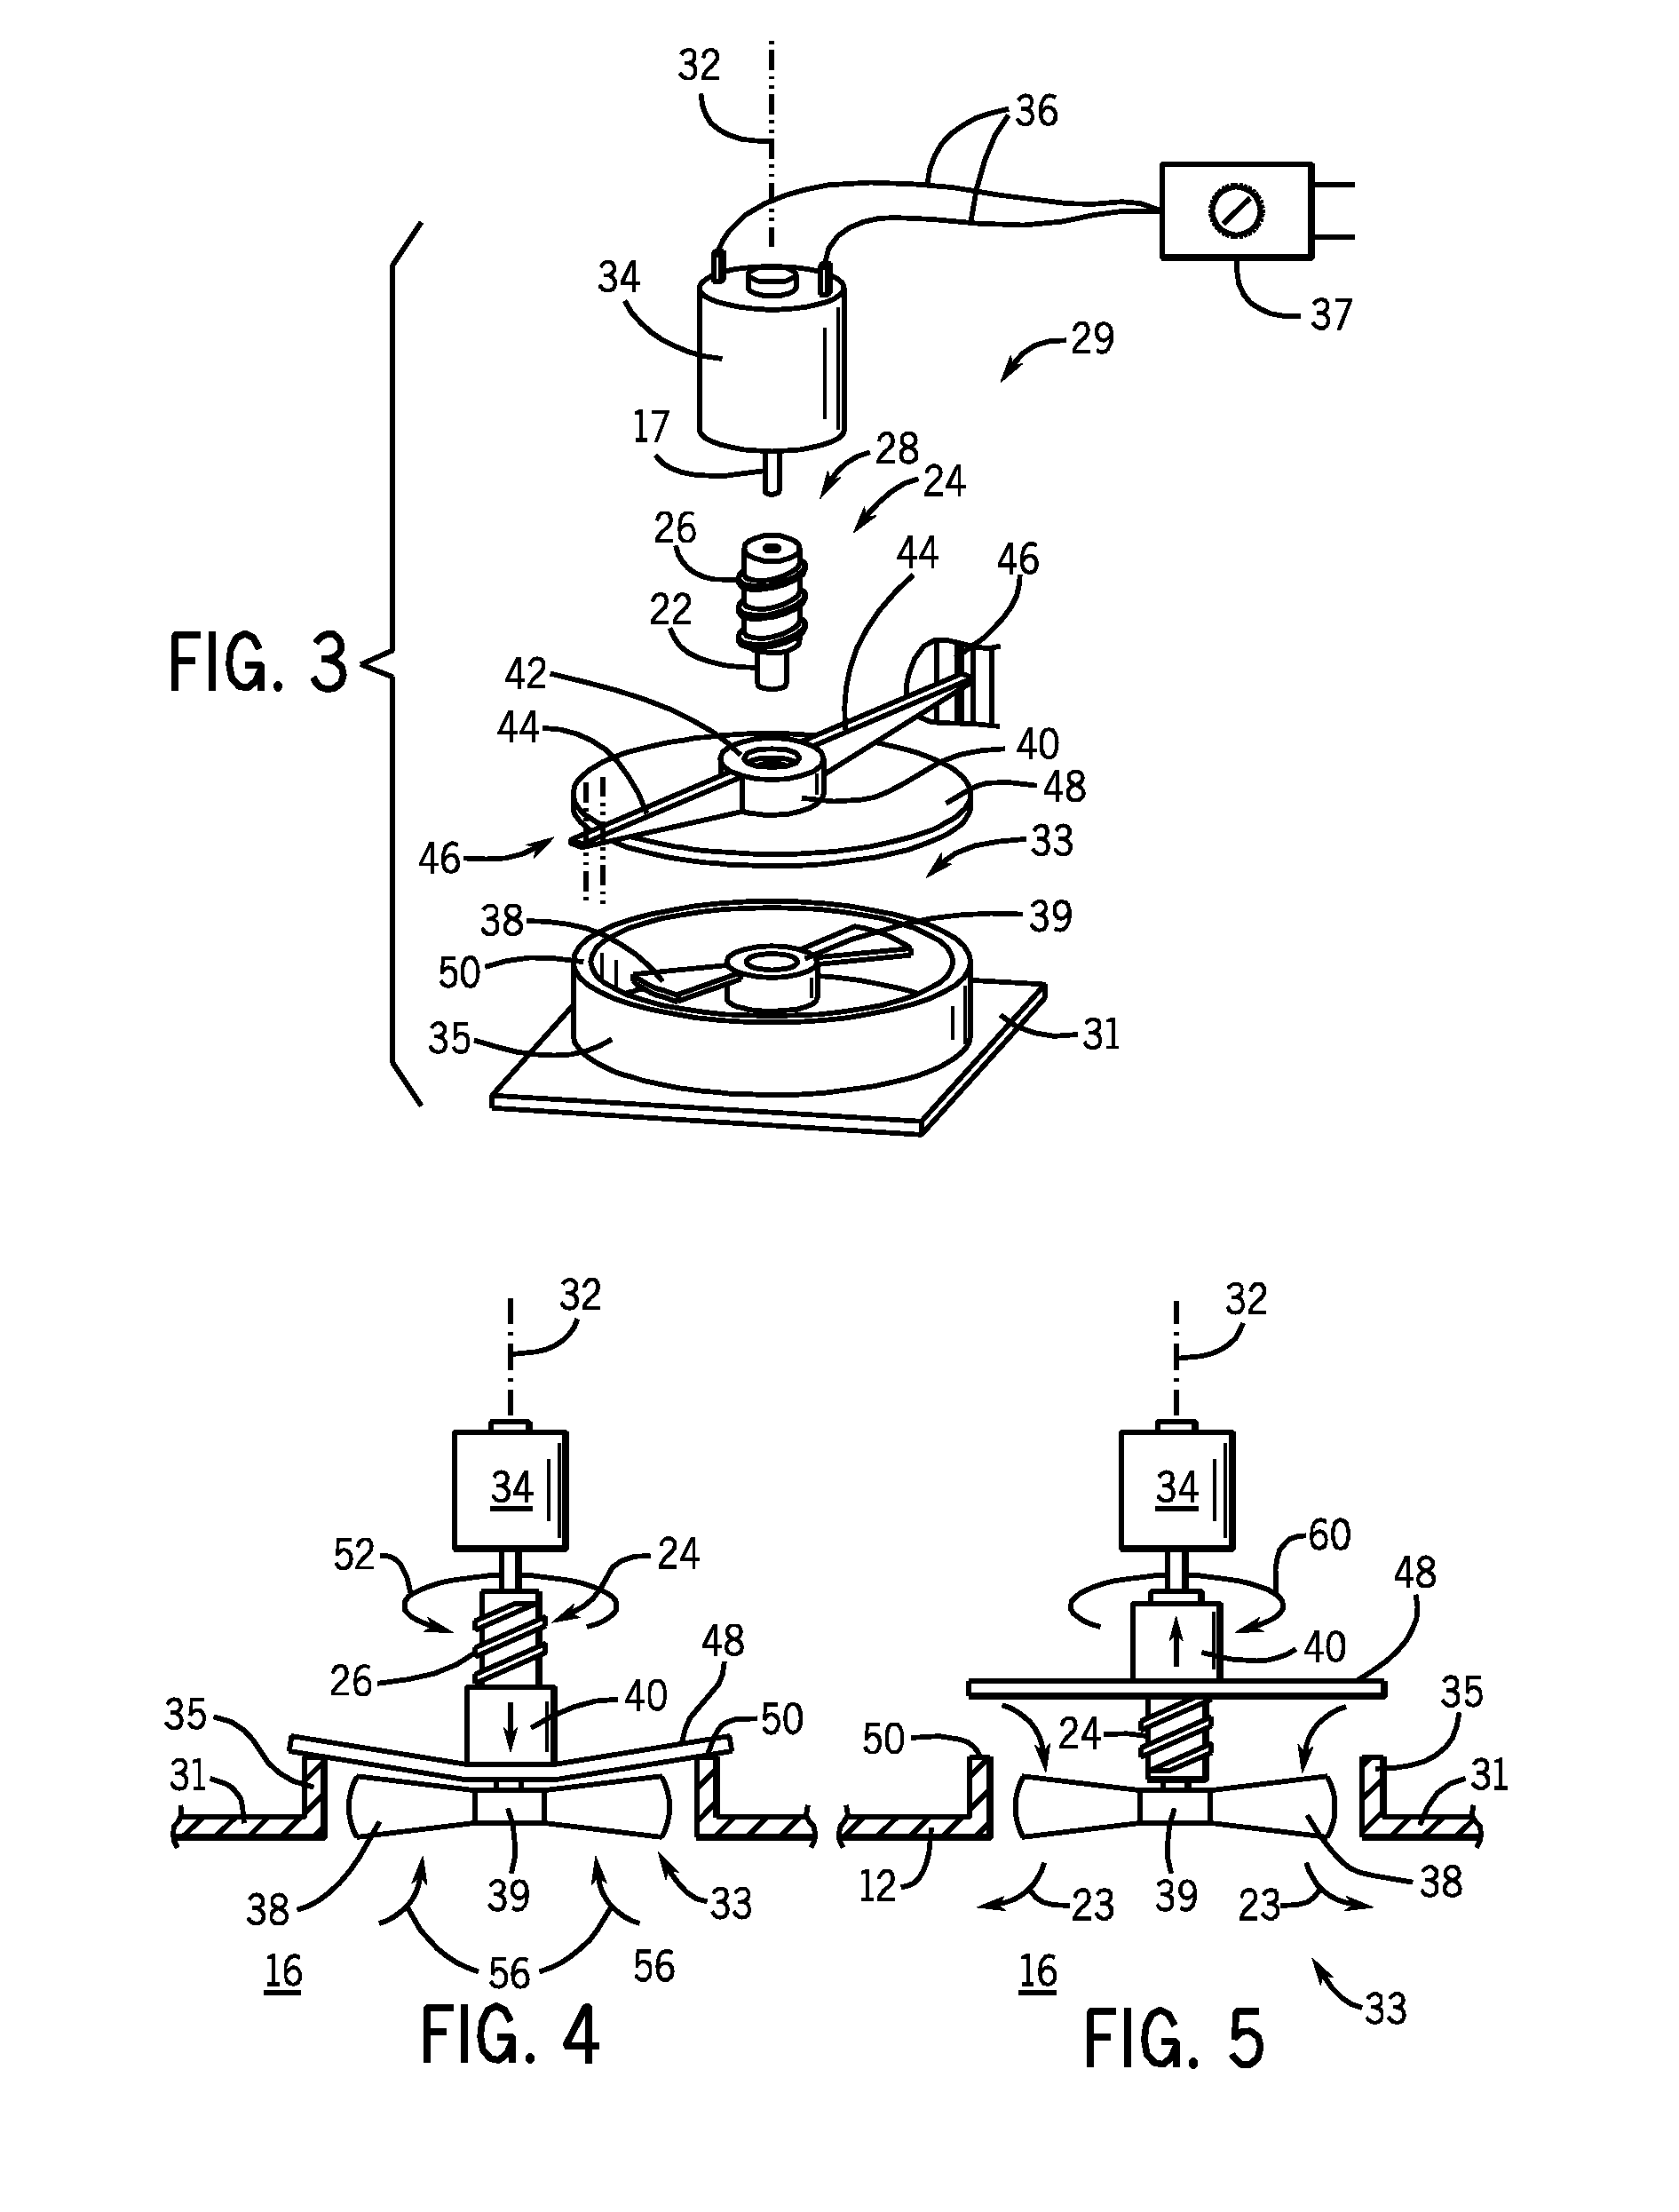 Dishwasher with self-sealing vent fan